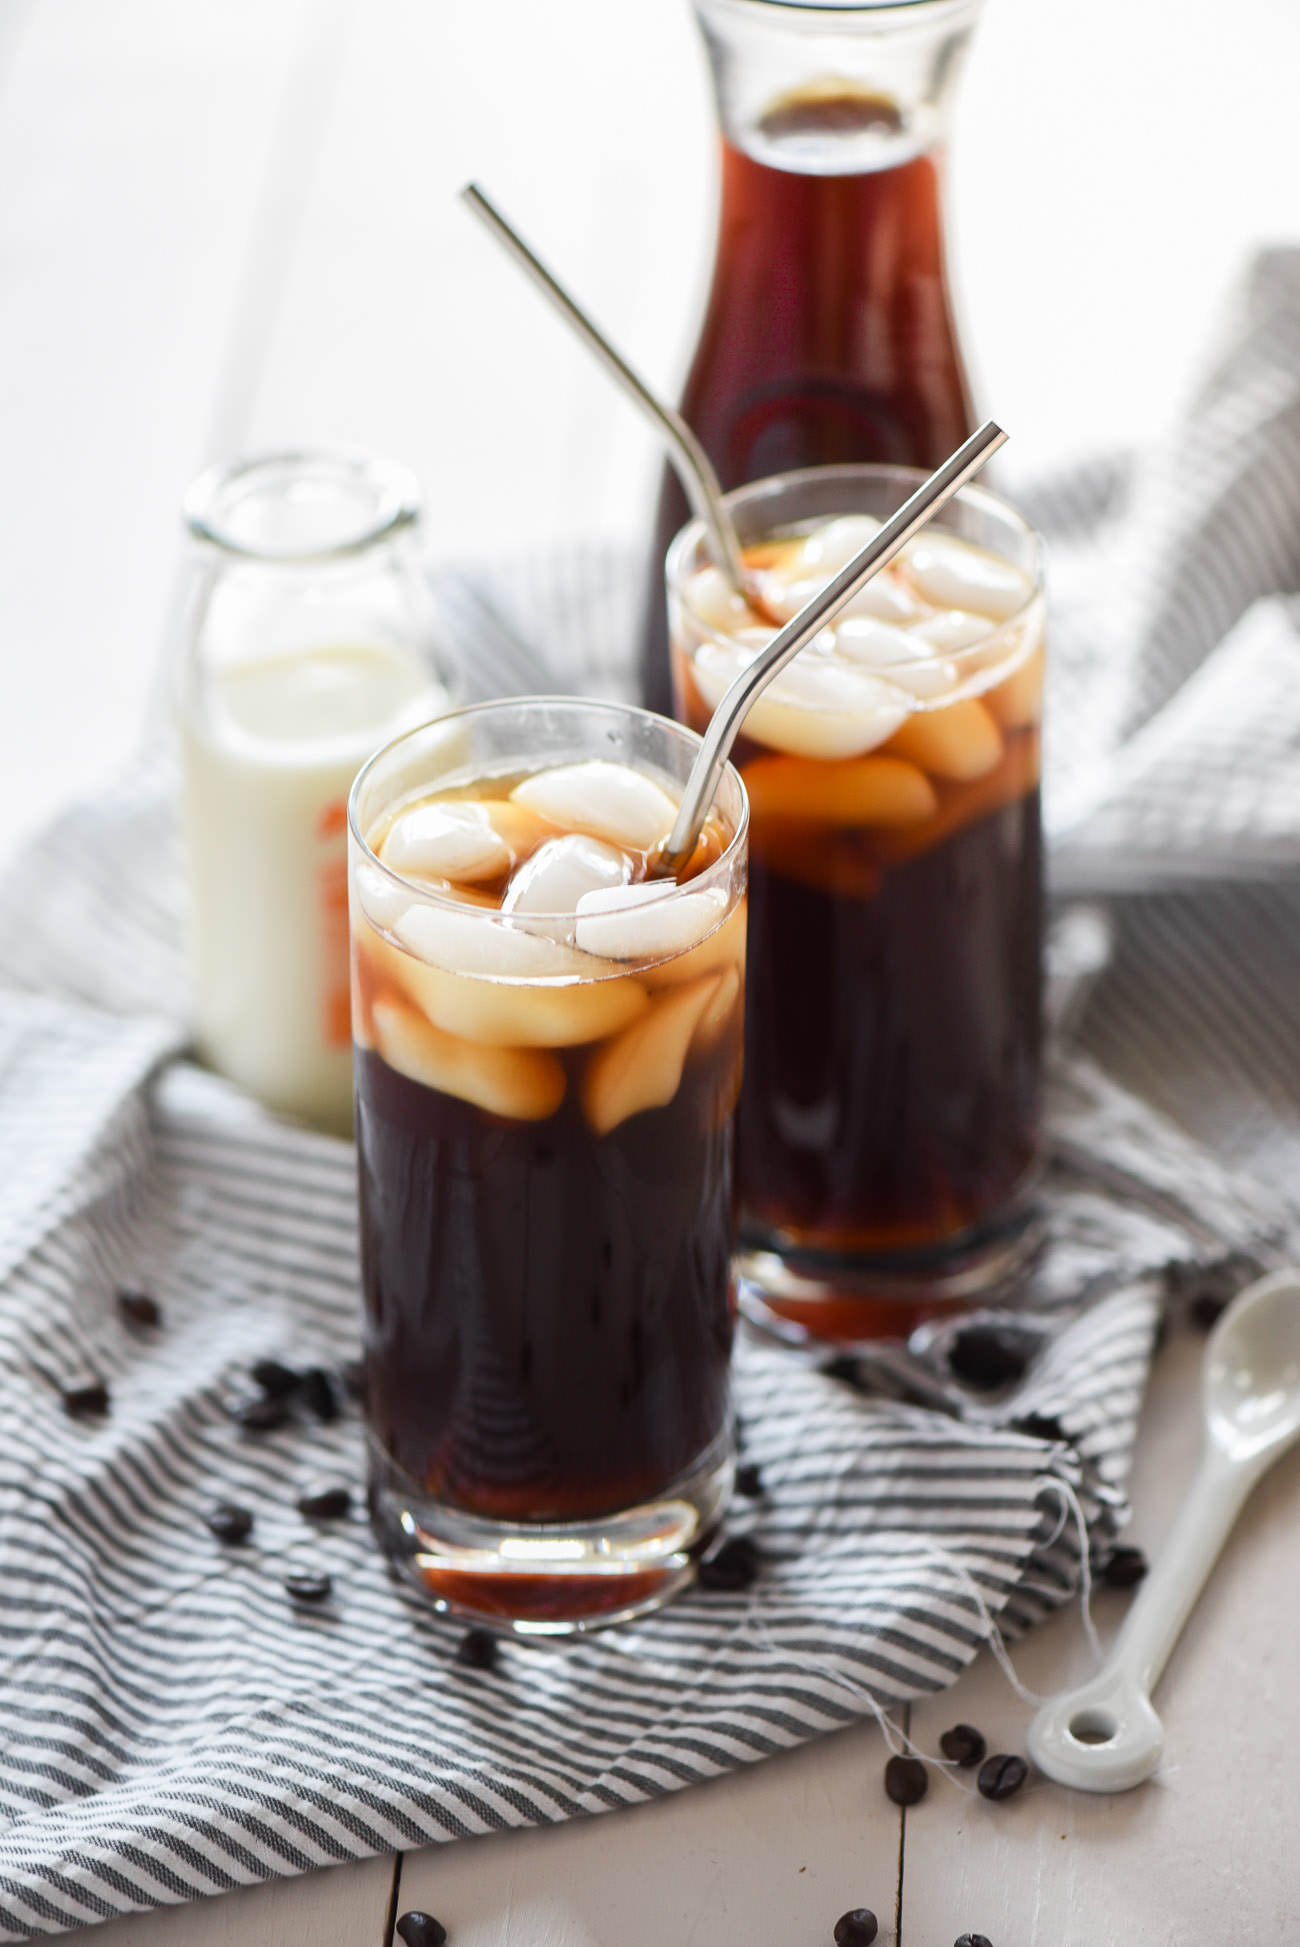 This Perfect Homemade Iced Coffee is a simple, homemade cold brew coffee that will make you think it's a coffee house treat!